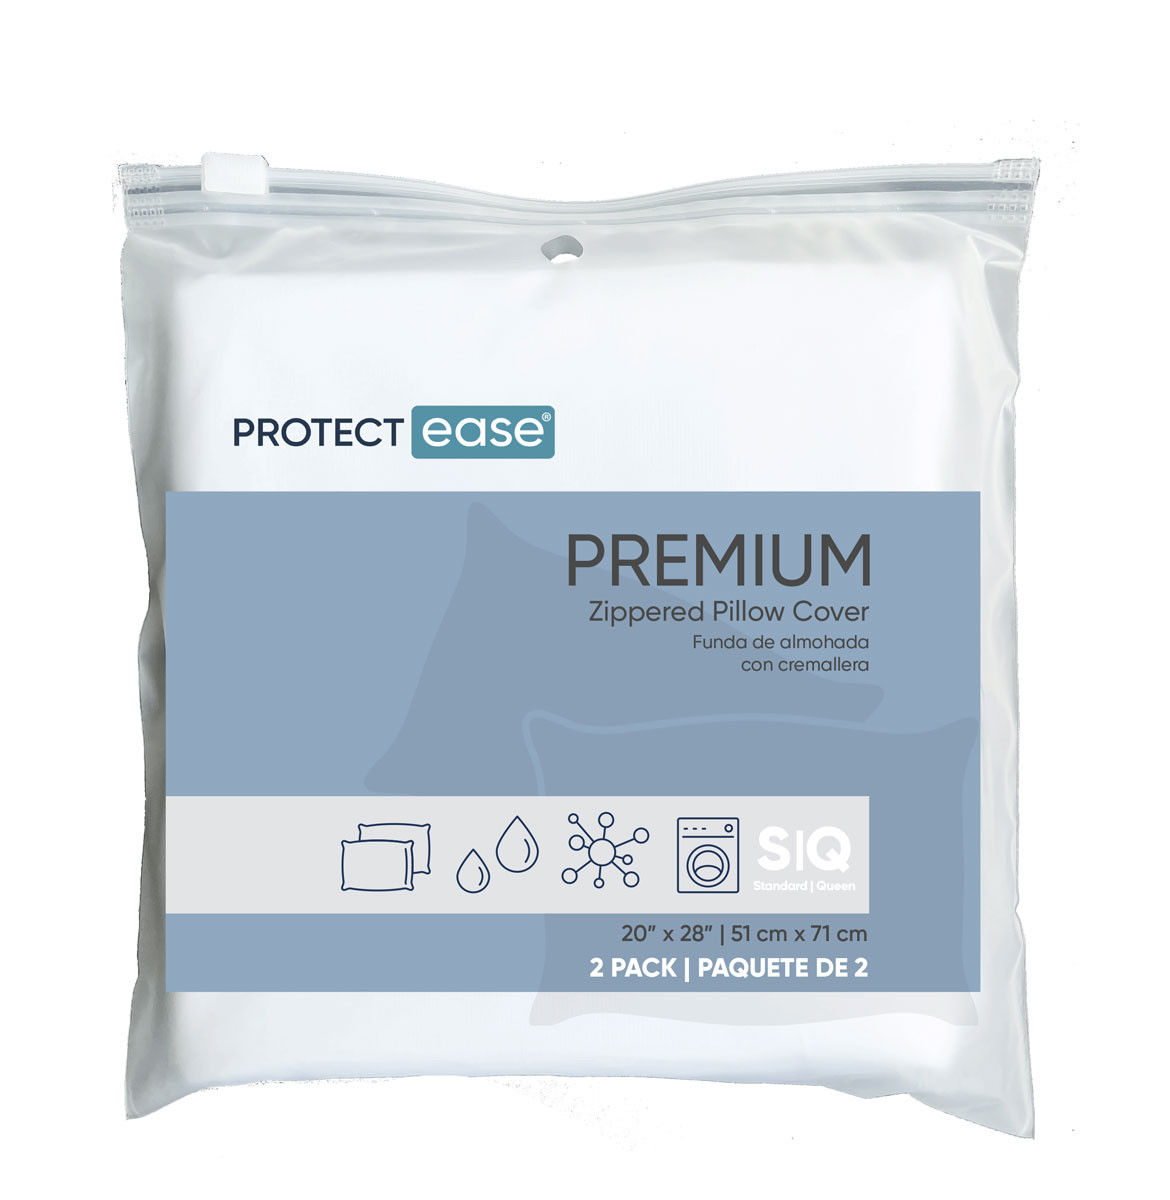 Does the PREMIUM LINE pillow ease cover have waterproof features?